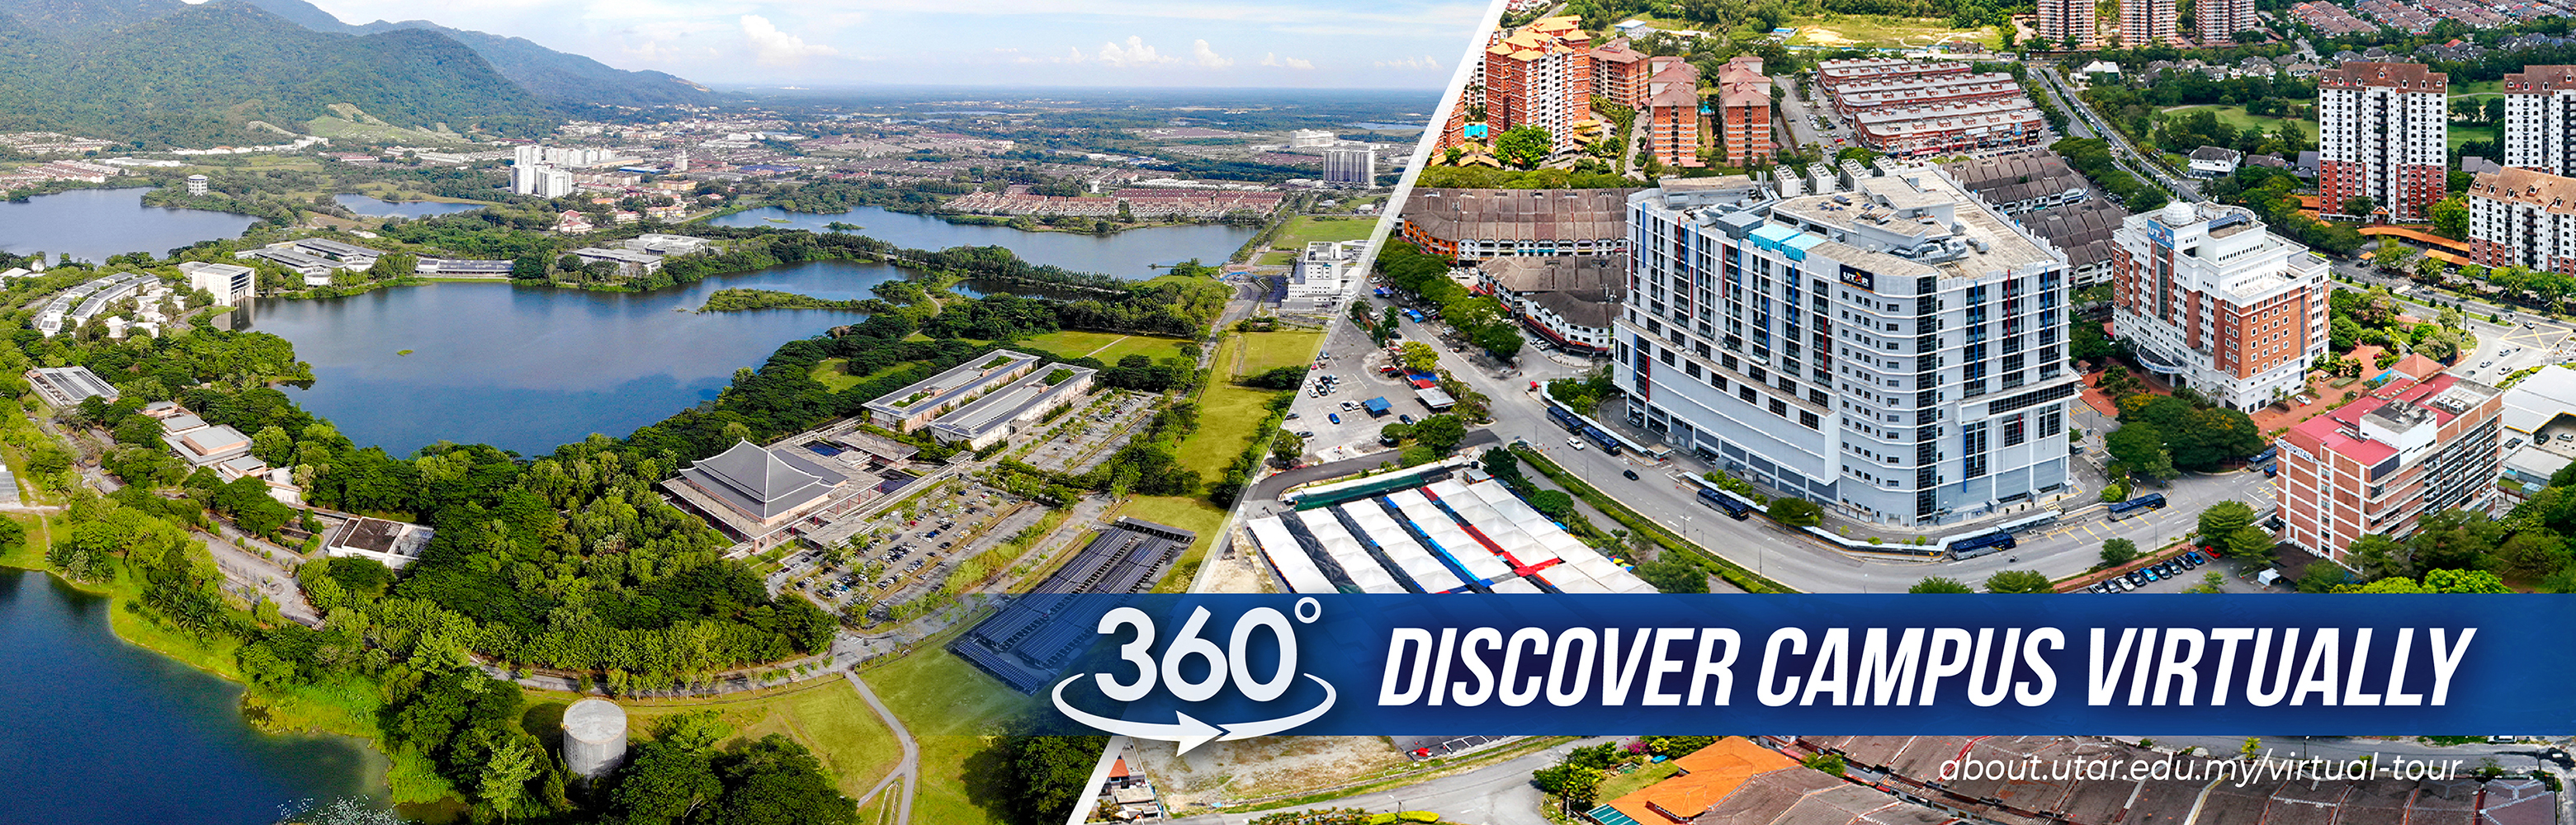 Click on the image to experience the 360-degree campus tour.